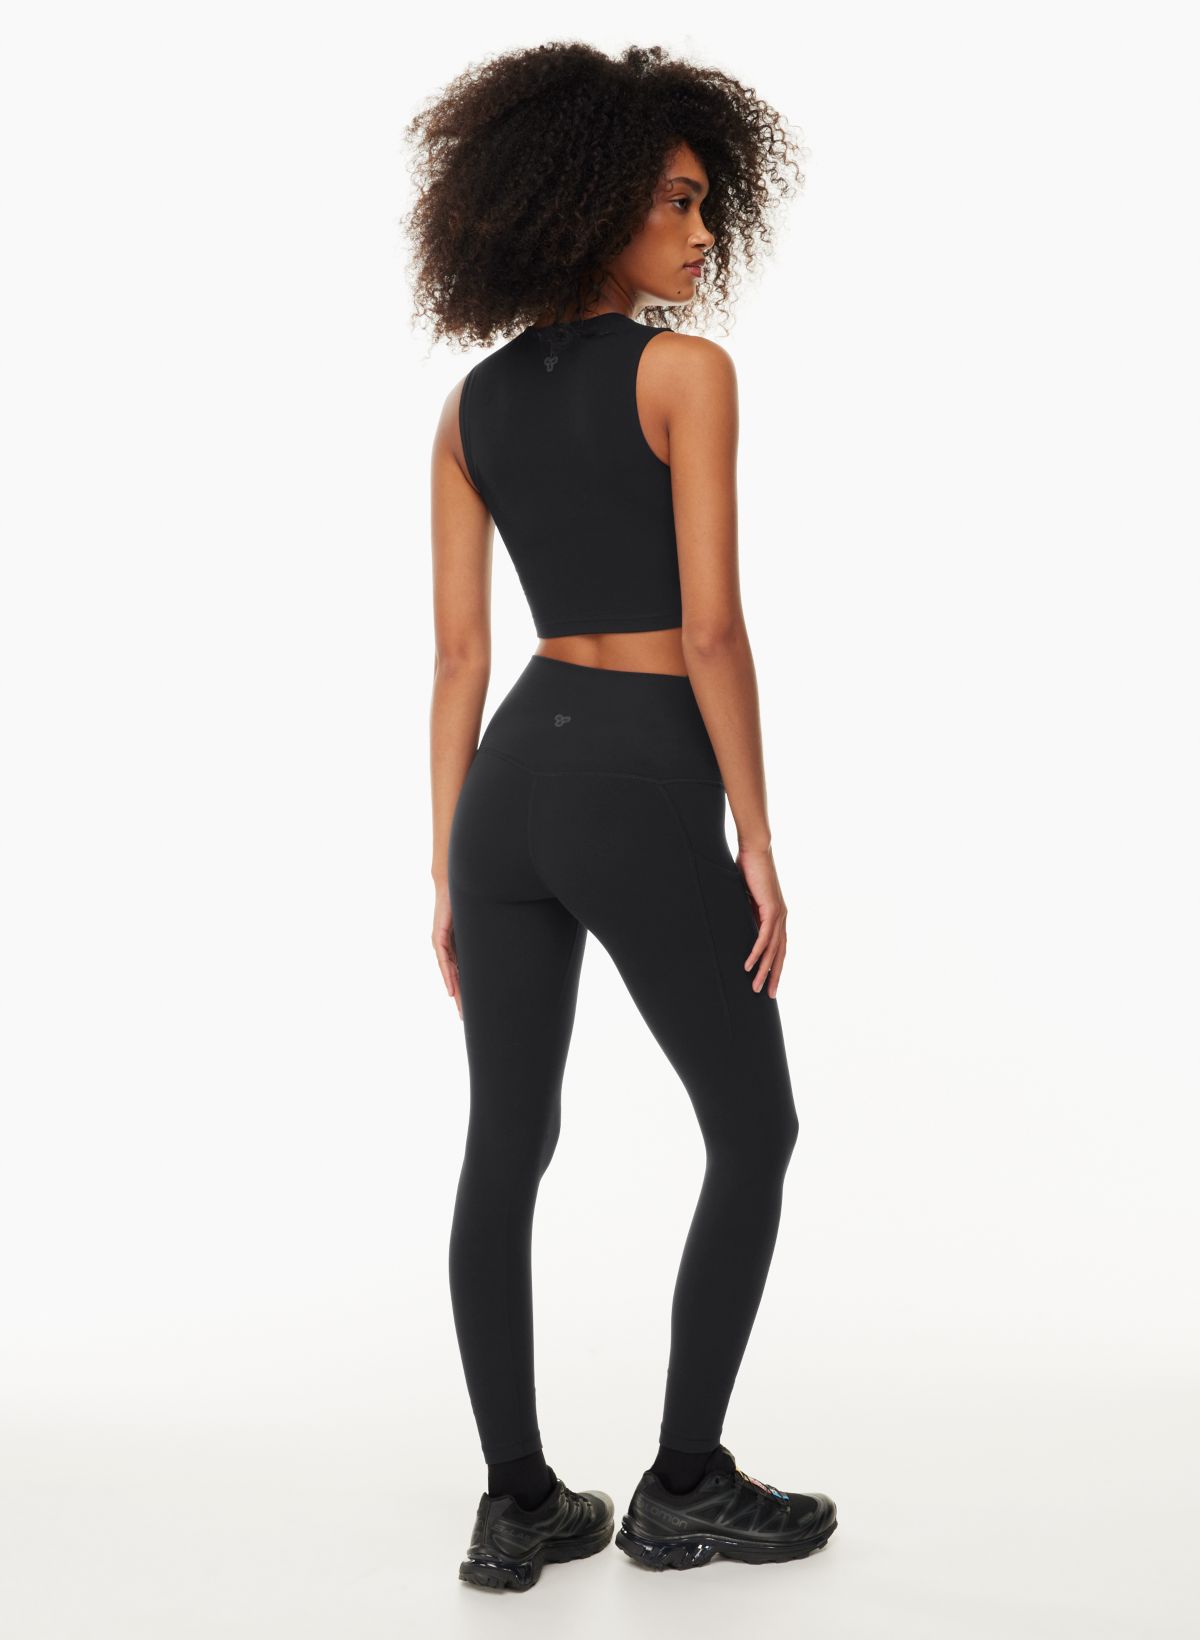 Butter Soft Flare Yoga Pants – Elle and Amore